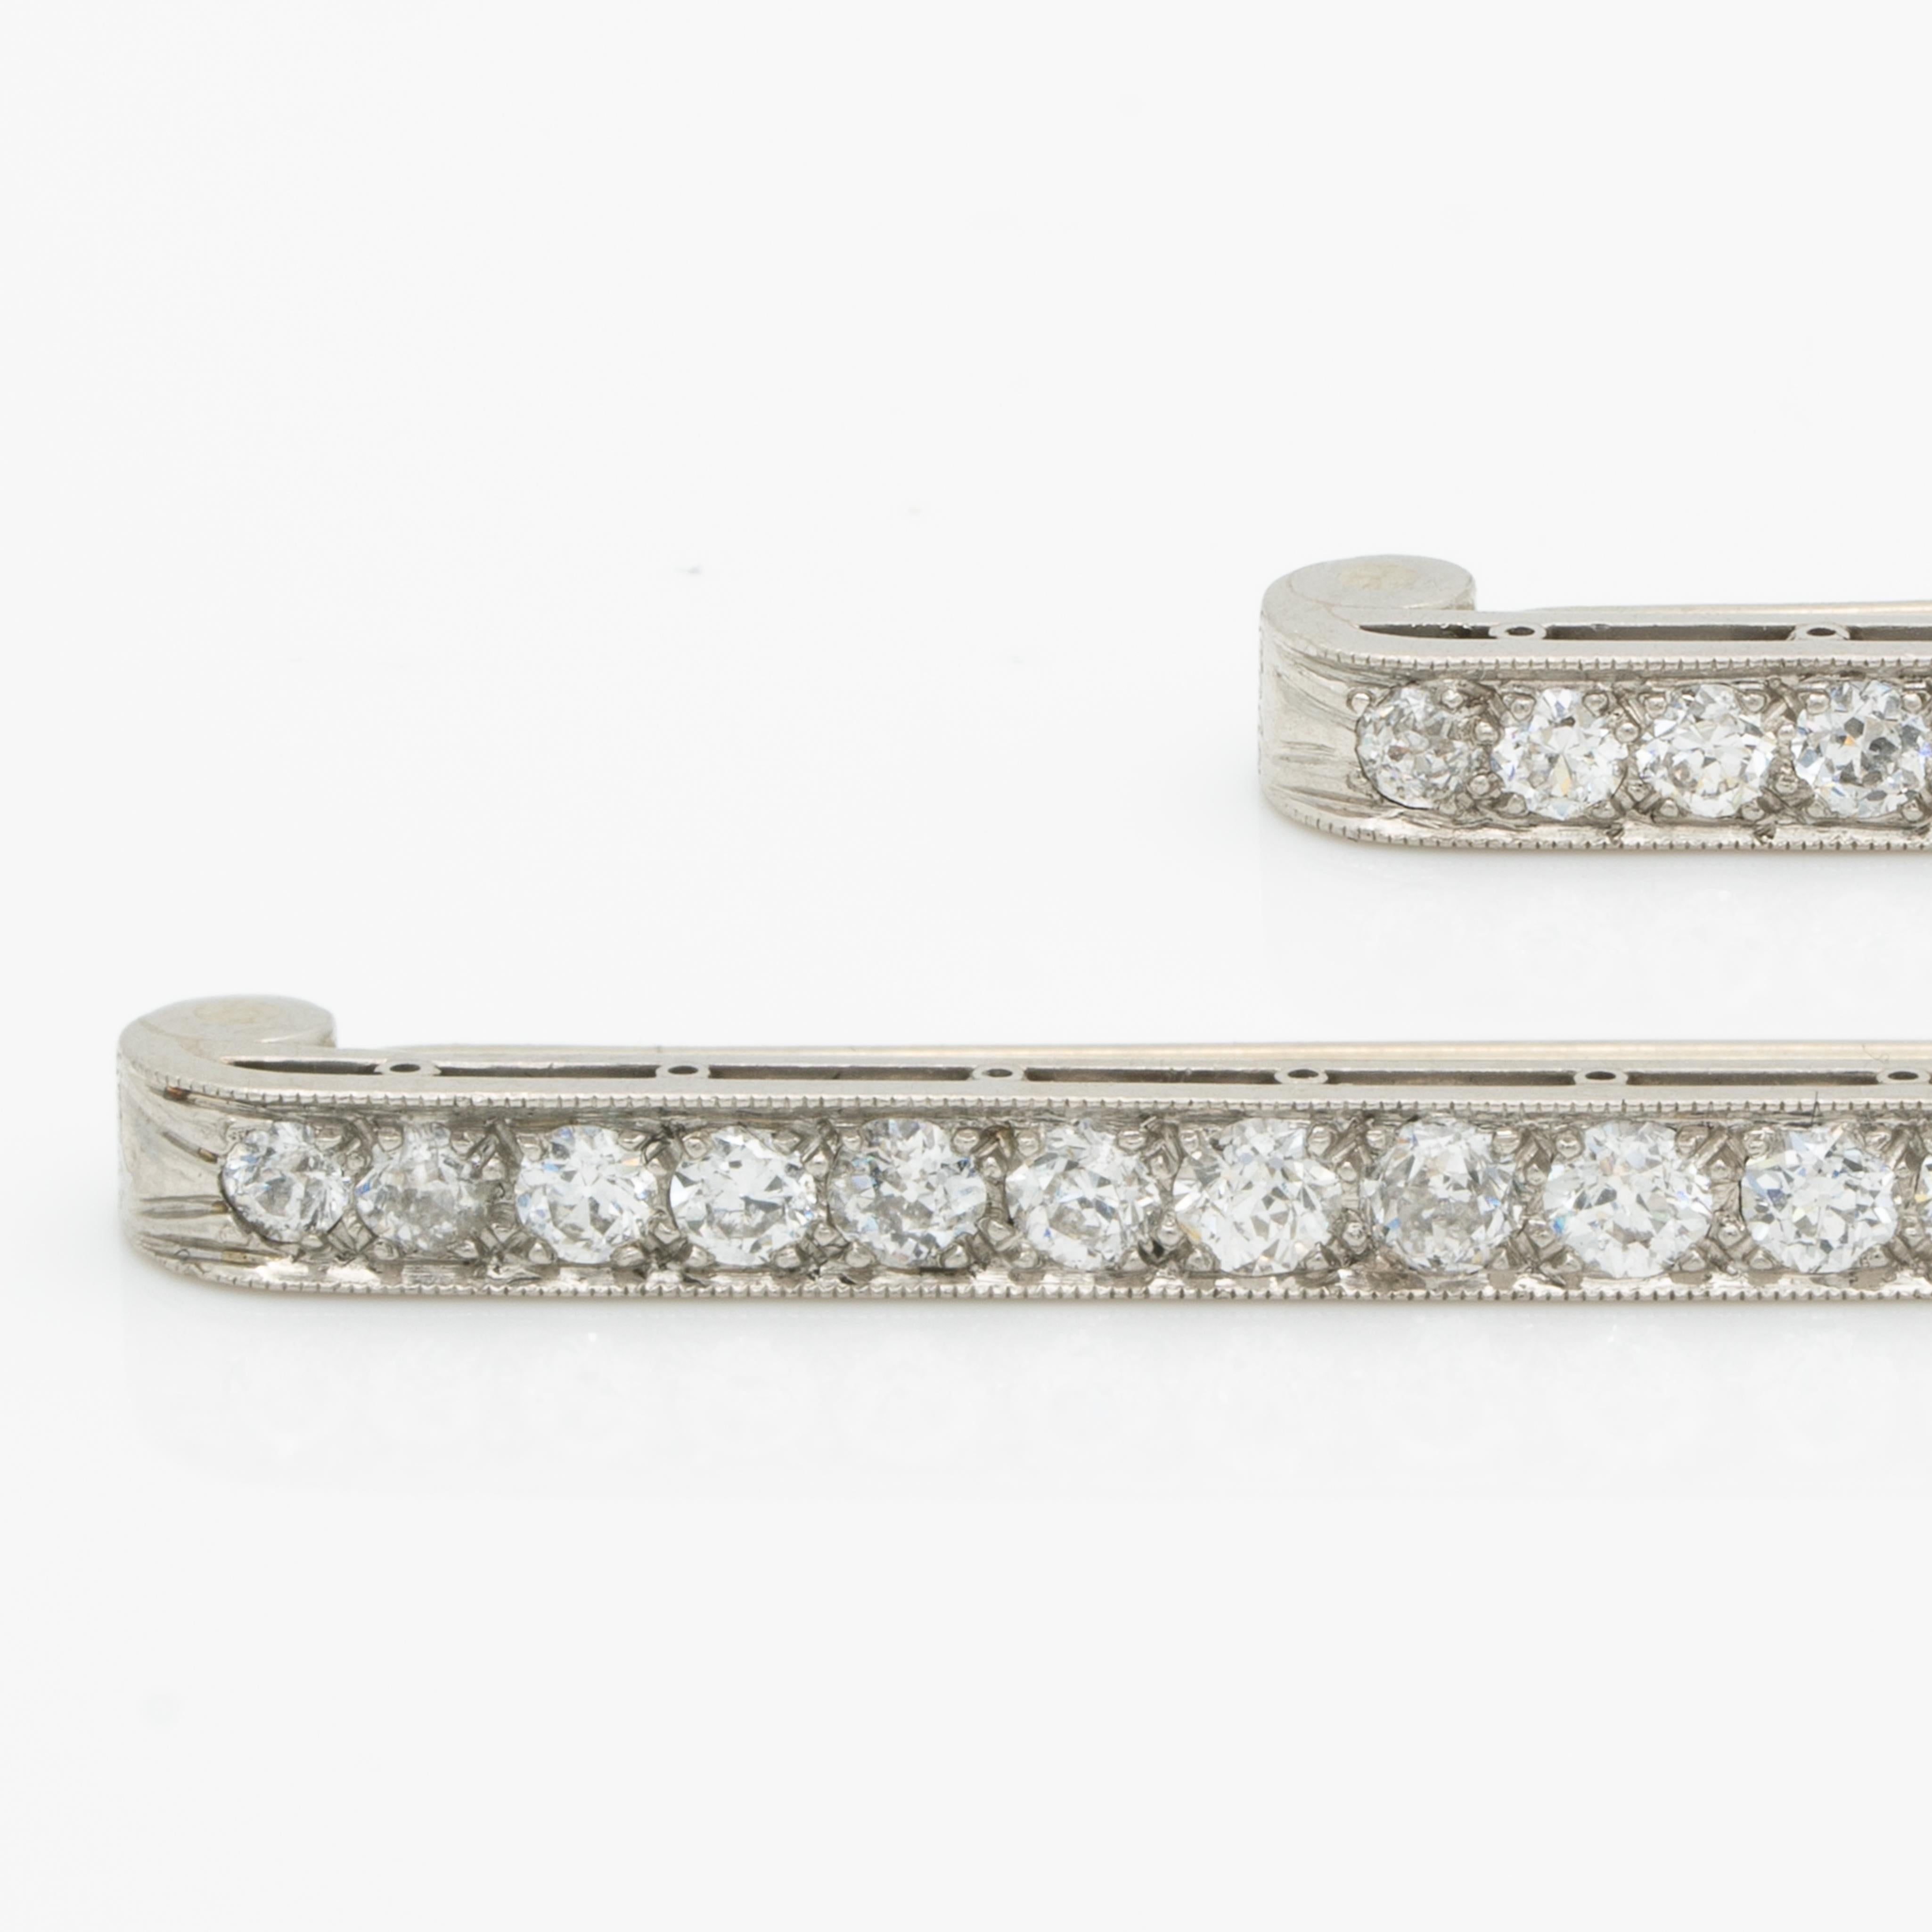 Art Deco Platinum and 2.0 cts Diamond Matching Pair Bar Brooches c.1925

Period: Edwardian
Year: c.1925
Material: Platinum and 2.0cts. Old European Cut Diamonds
Weight: 6.42g (Weight of Pair)
Height:38.7 mm/1.52 inches 
Width: 3.24mm/0.18